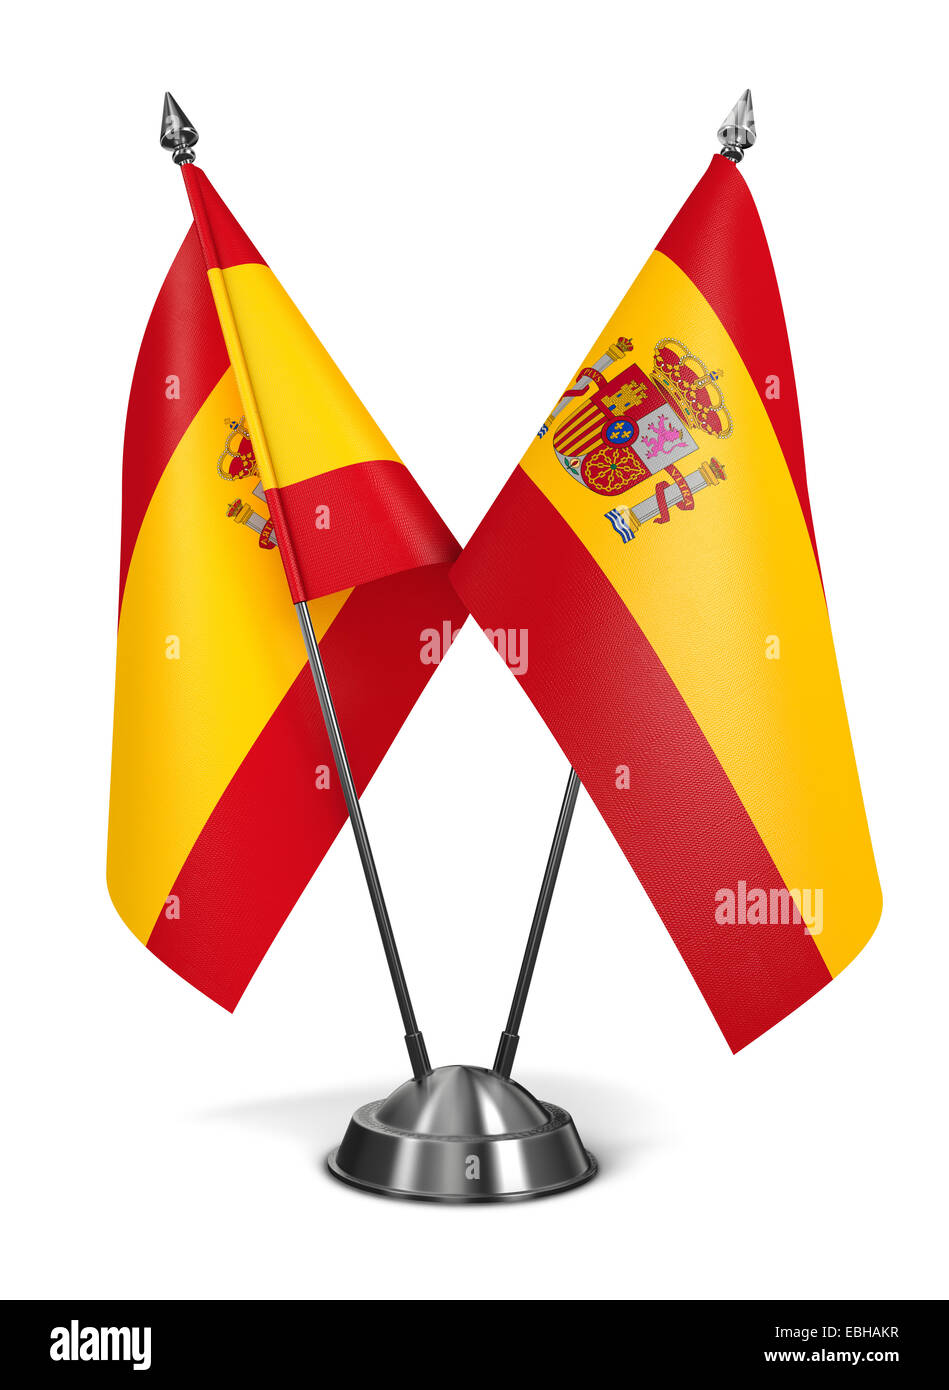 Kingdom of Spain - Miniature Flags Isolated on White Background. Stock Photo